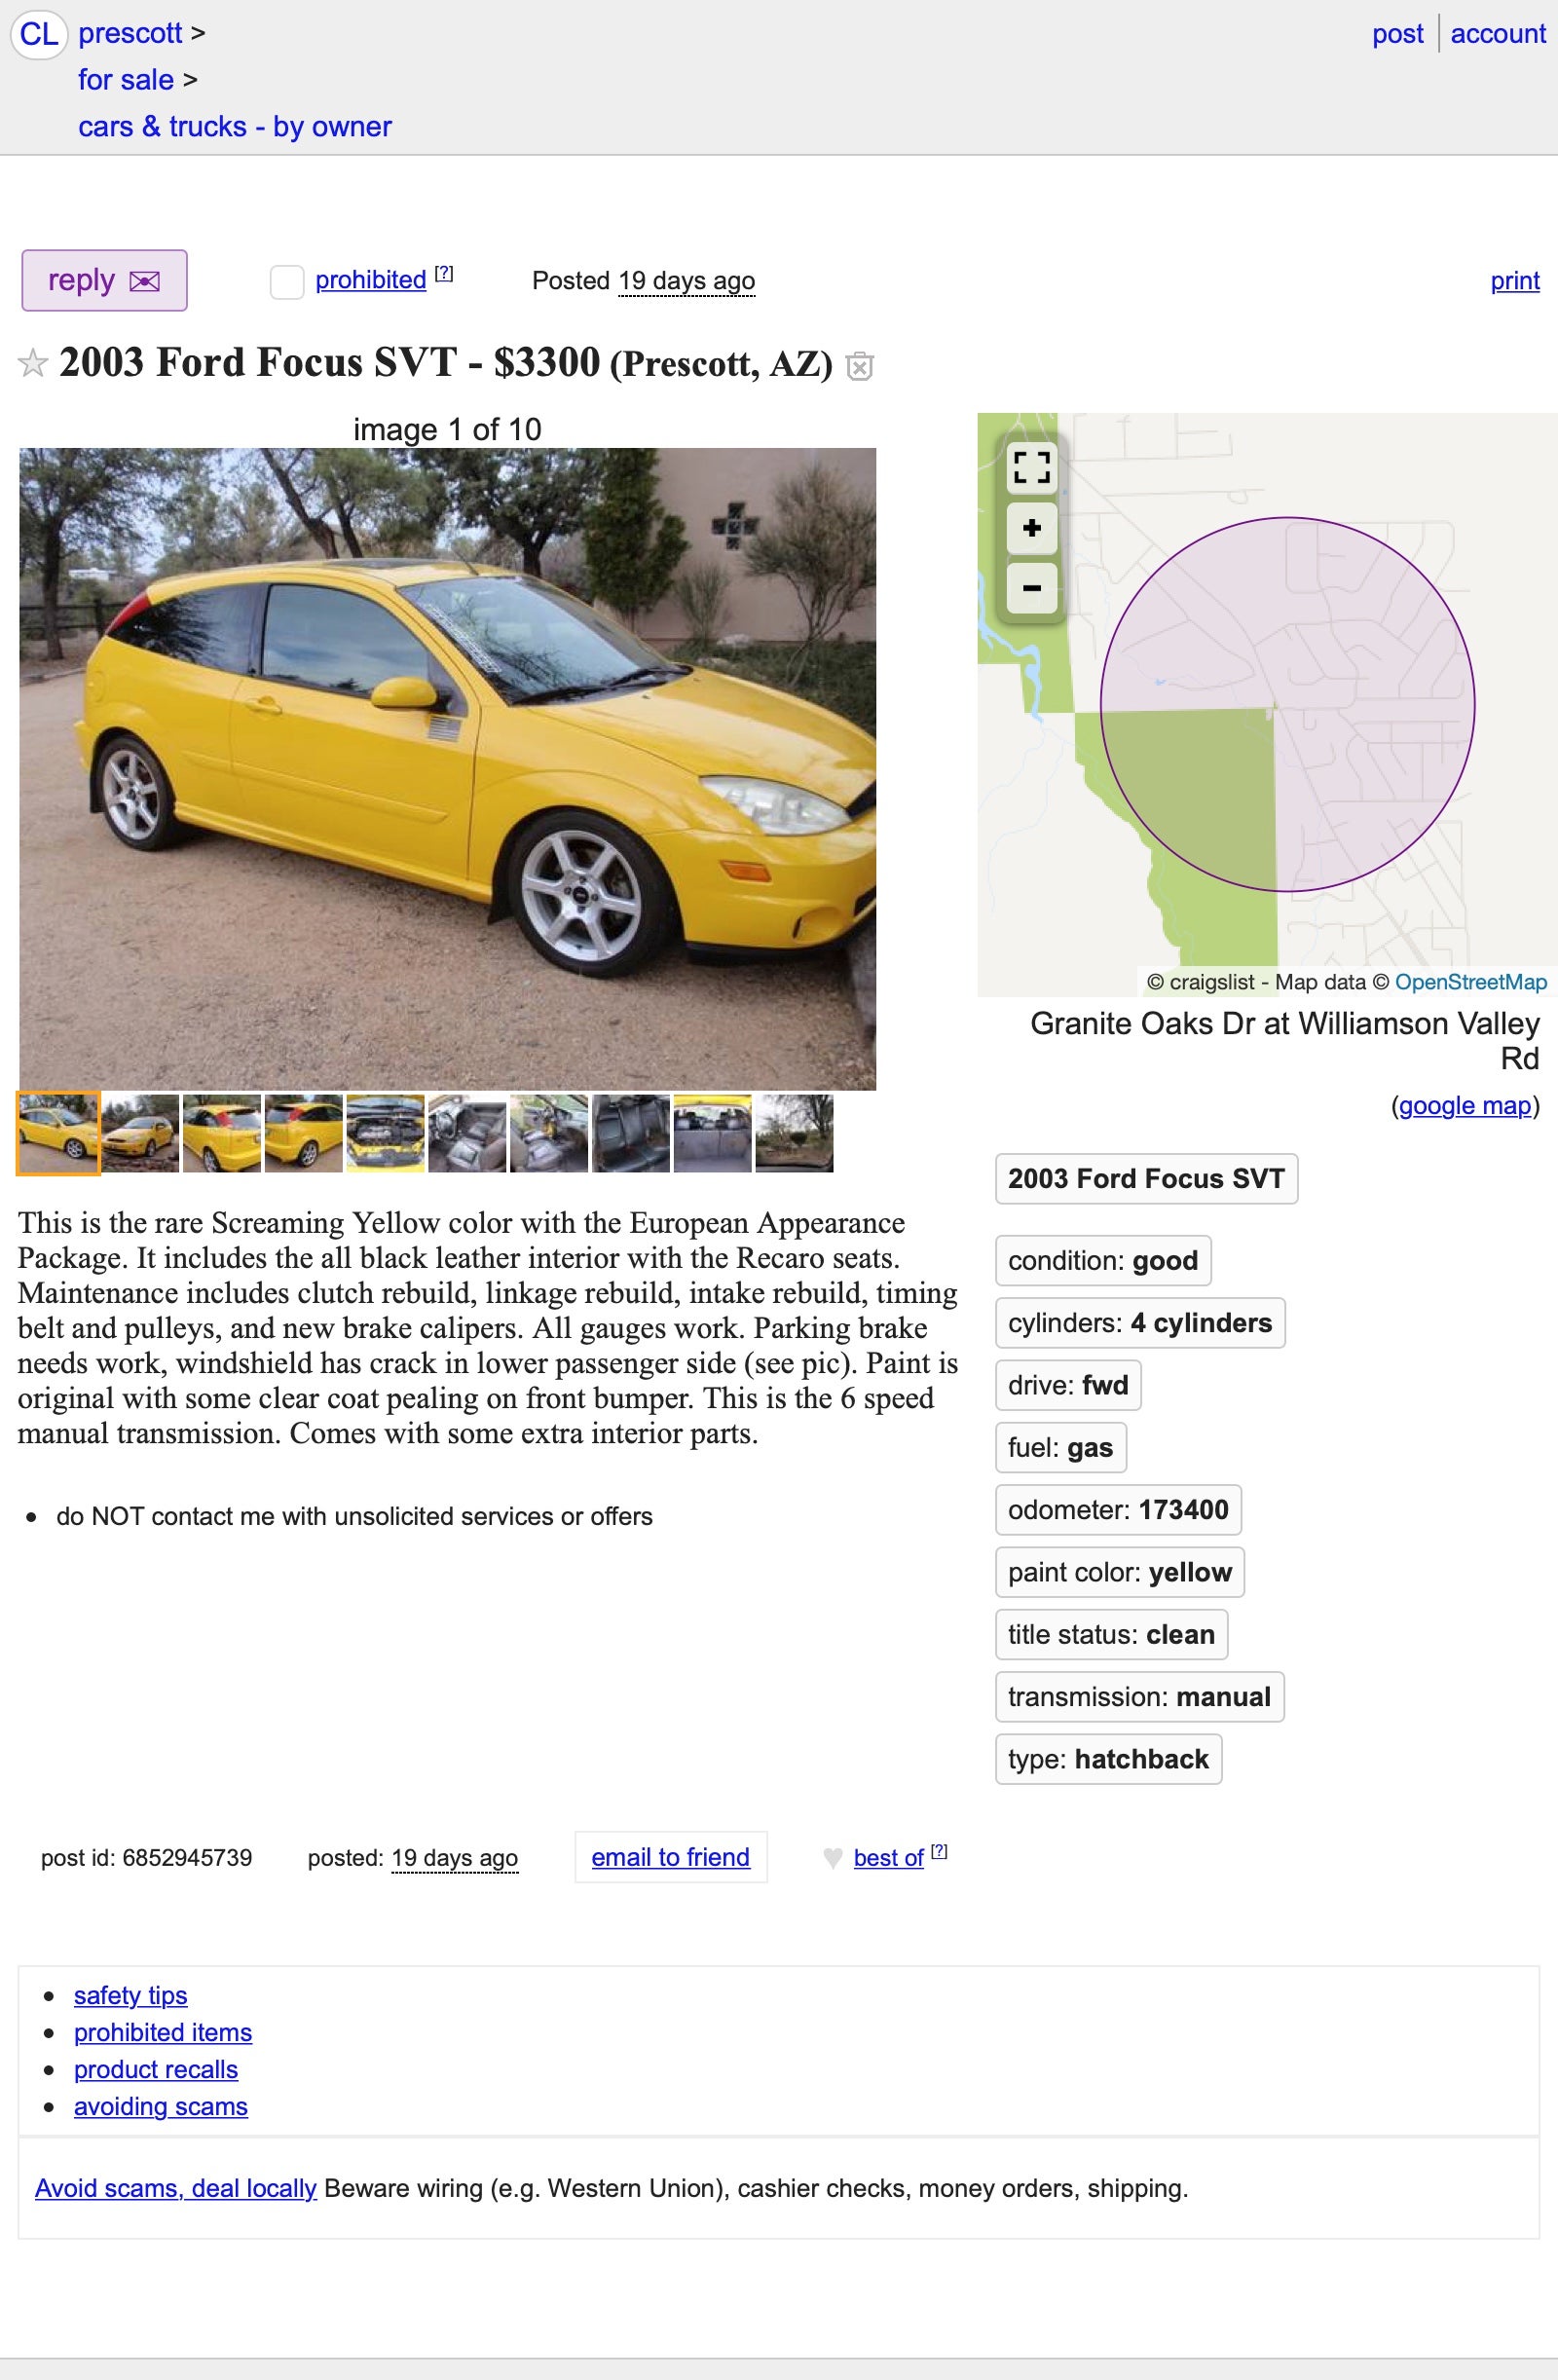 At $3,300, Could This 2003 Ford Focus SVT Be a Hot Hatch ...